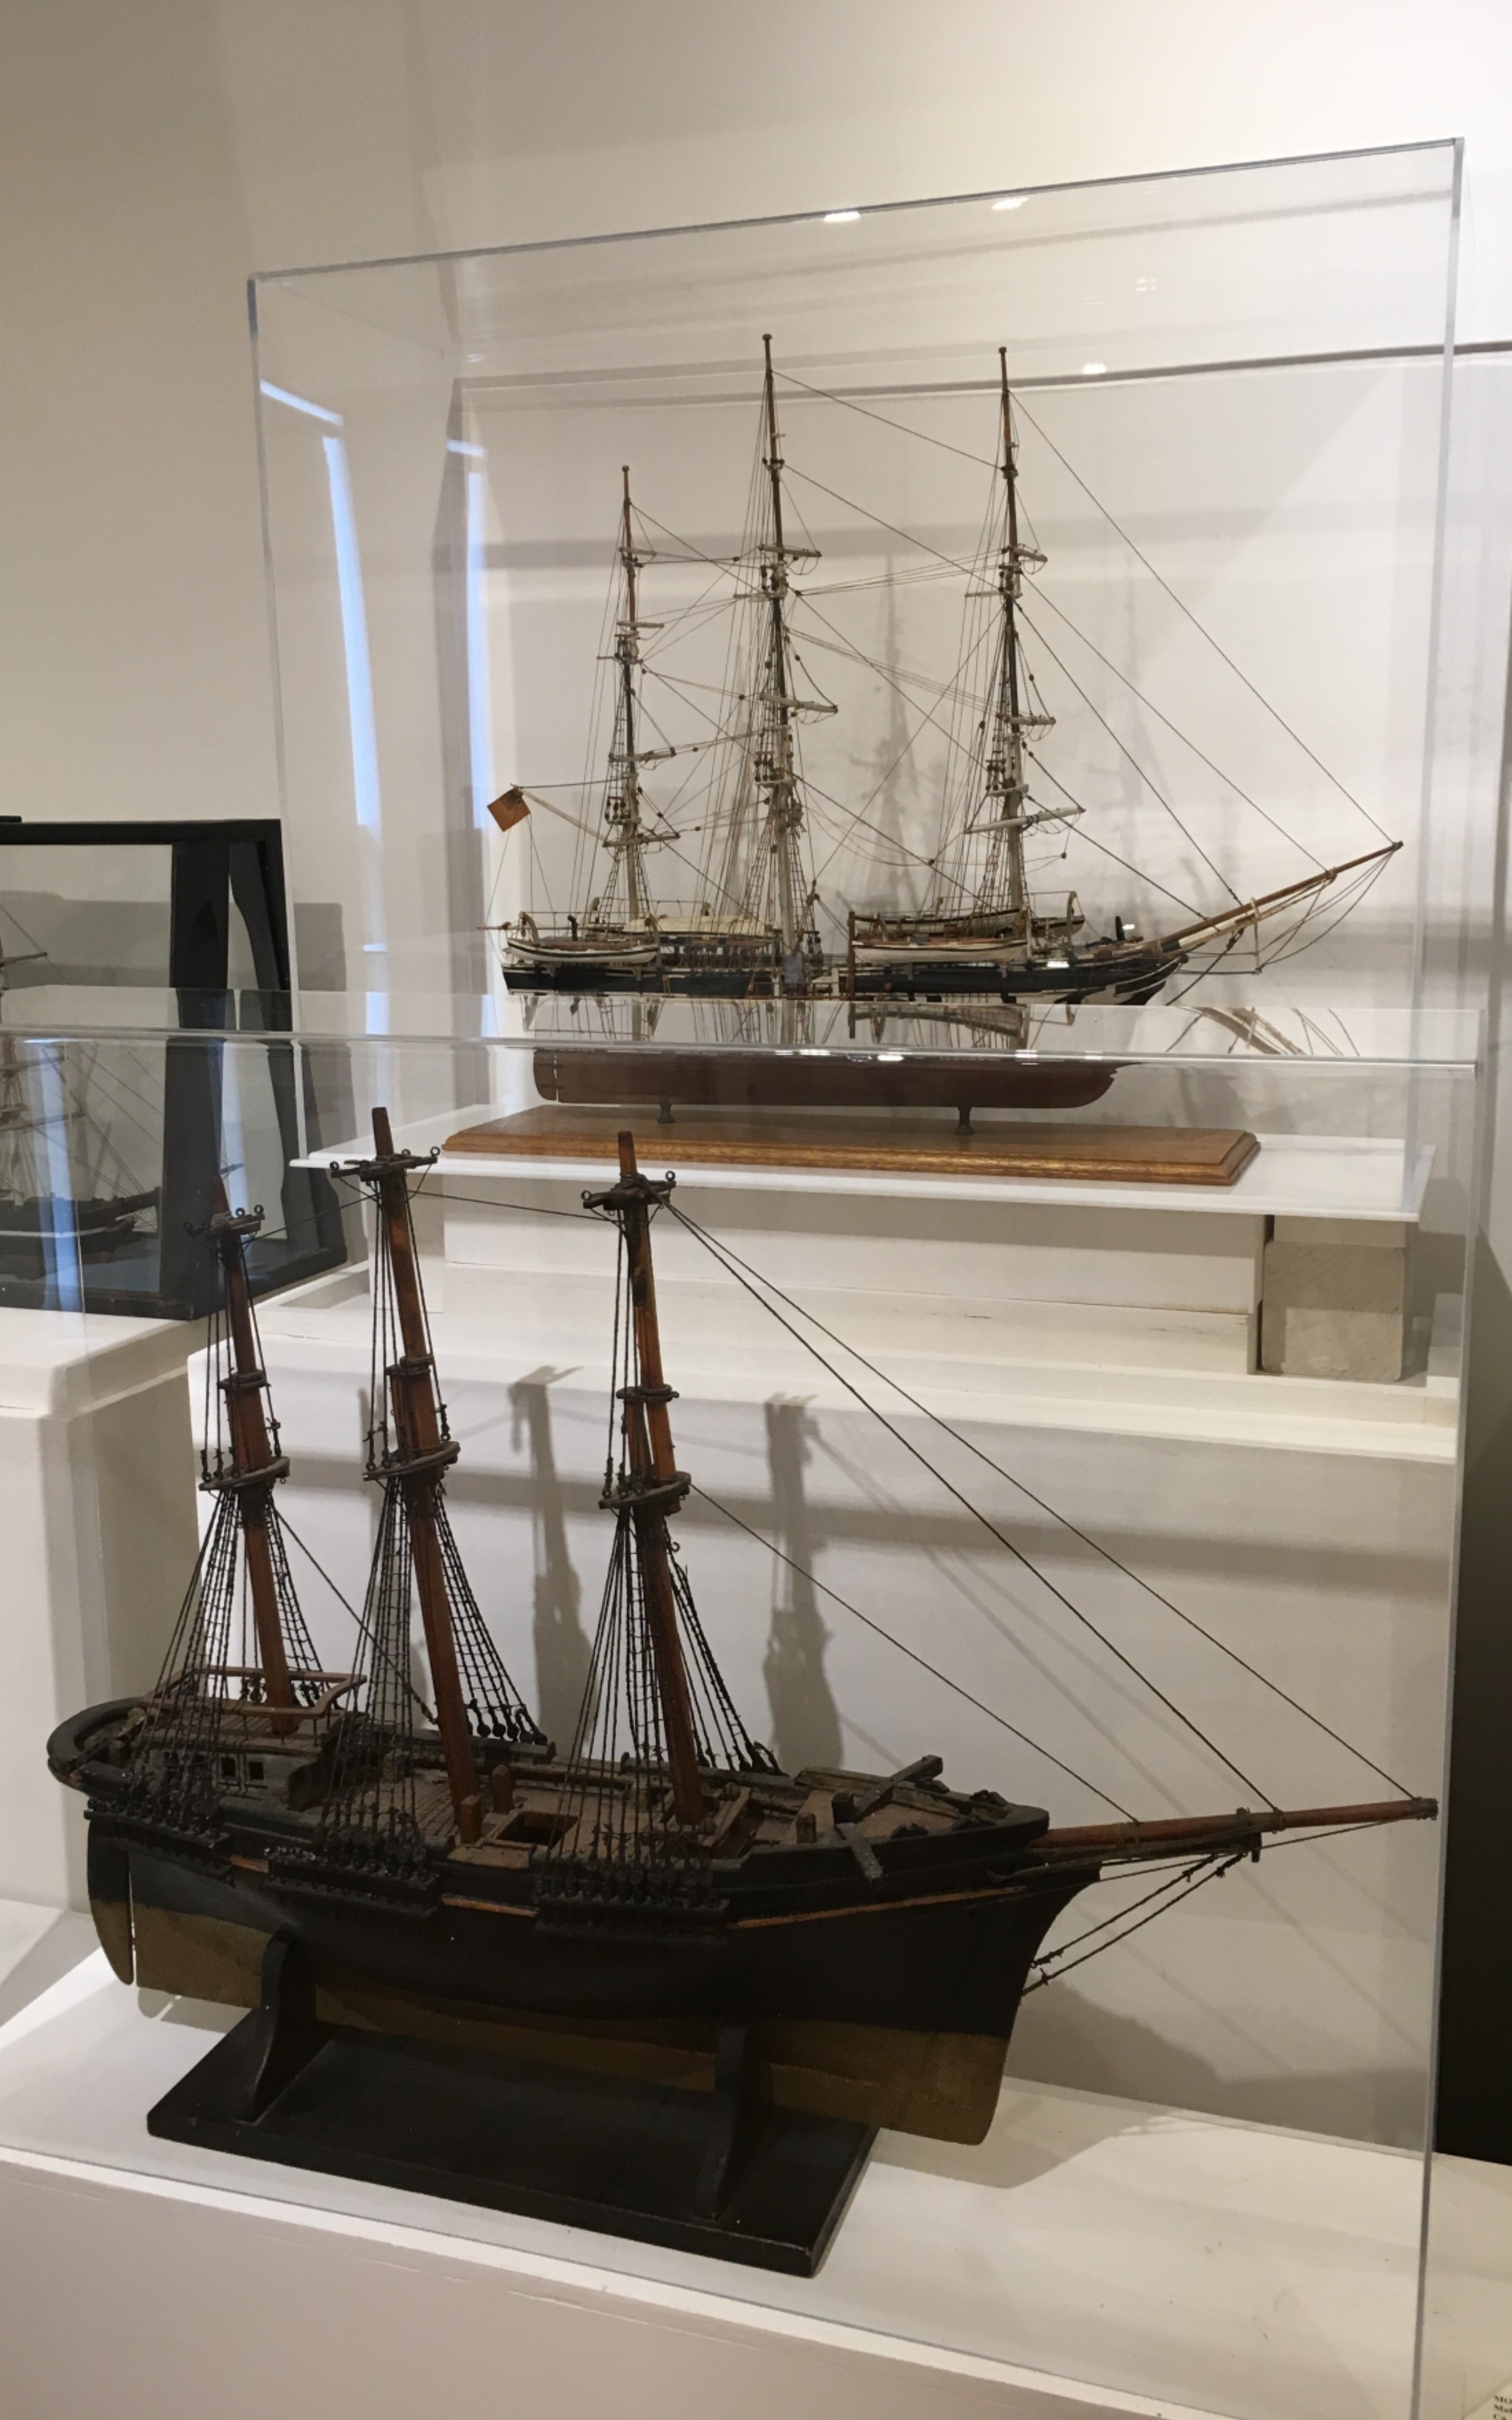 <h3>MODEL OF THE <em>CHARLES W. MORGAN</em></h3>
<br>
<p><strong>Attributed to Wiliam Conklin</strong></p>
<p><strong>1900?</strong></p>
<br>
<p>The Charles W. Morgan is the last ship of an American whaling fleet that numbered
more than 2700 vessels. She was built in 1841 in New Bedford, Massachusetts, and
measures 106 feet 11 inches on deck; her beam measures 27 feet, 9 inches. Over an
extraordinarily long eighty-year whaling career, she made thirty-seven voyages –
most lasting at least three years. The Charles W. Morgan’s whaling days ended in
1921, and since 1941 she has been at Mystic Seaport in Connecticut. After a major
restoration, the Charles W. Morgan made her thirty-eighth voyage in 2014 around
New England ports. This model shows her crew cutting in a whale; the large strip of
blubber would be boiled in the trypots on the forward deck to produce whale oil.</p>
<br>
</p>The Charles W. Morgan is the last ship of an American whaling fleet that numbered
more than 2700 vessels. She was built in 1841 in New Bedford, Massachusetts, and
measures 106 feet 11 inches on deck; her beam measures 27 feet, 9 inches. Over an
extraordinarily long eighty-year whaling career, she made thirty-seven voyages –
most lasting at least three years. The Charles W. Morgan’s whaling days ended in
1921, and since 1941 she has been at Mystic Seaport in Connecticut. After a major
restoration, the Charles W. Morgan made her thirty-eighth voyage in 2014 around
New England ports. This model shows her crew cutting in a whale; the large strip of
blubber would be boiled in the trypots on the forward deck to produce whale oil.</p>
<br>
<h3>MODEL OF A THREE MASTED SHIP</em></h3>
<br>
<p><strong>Maker unknown</strong></p>
<p><strong>Ca. 1900?</strong></p>
<br>
<p>This seems to be an unfinished model of an unidentified ship as the three masts have
no yards to hold the sails. Although a well-constructed model, there are condition
problems as well with this model.</p>

